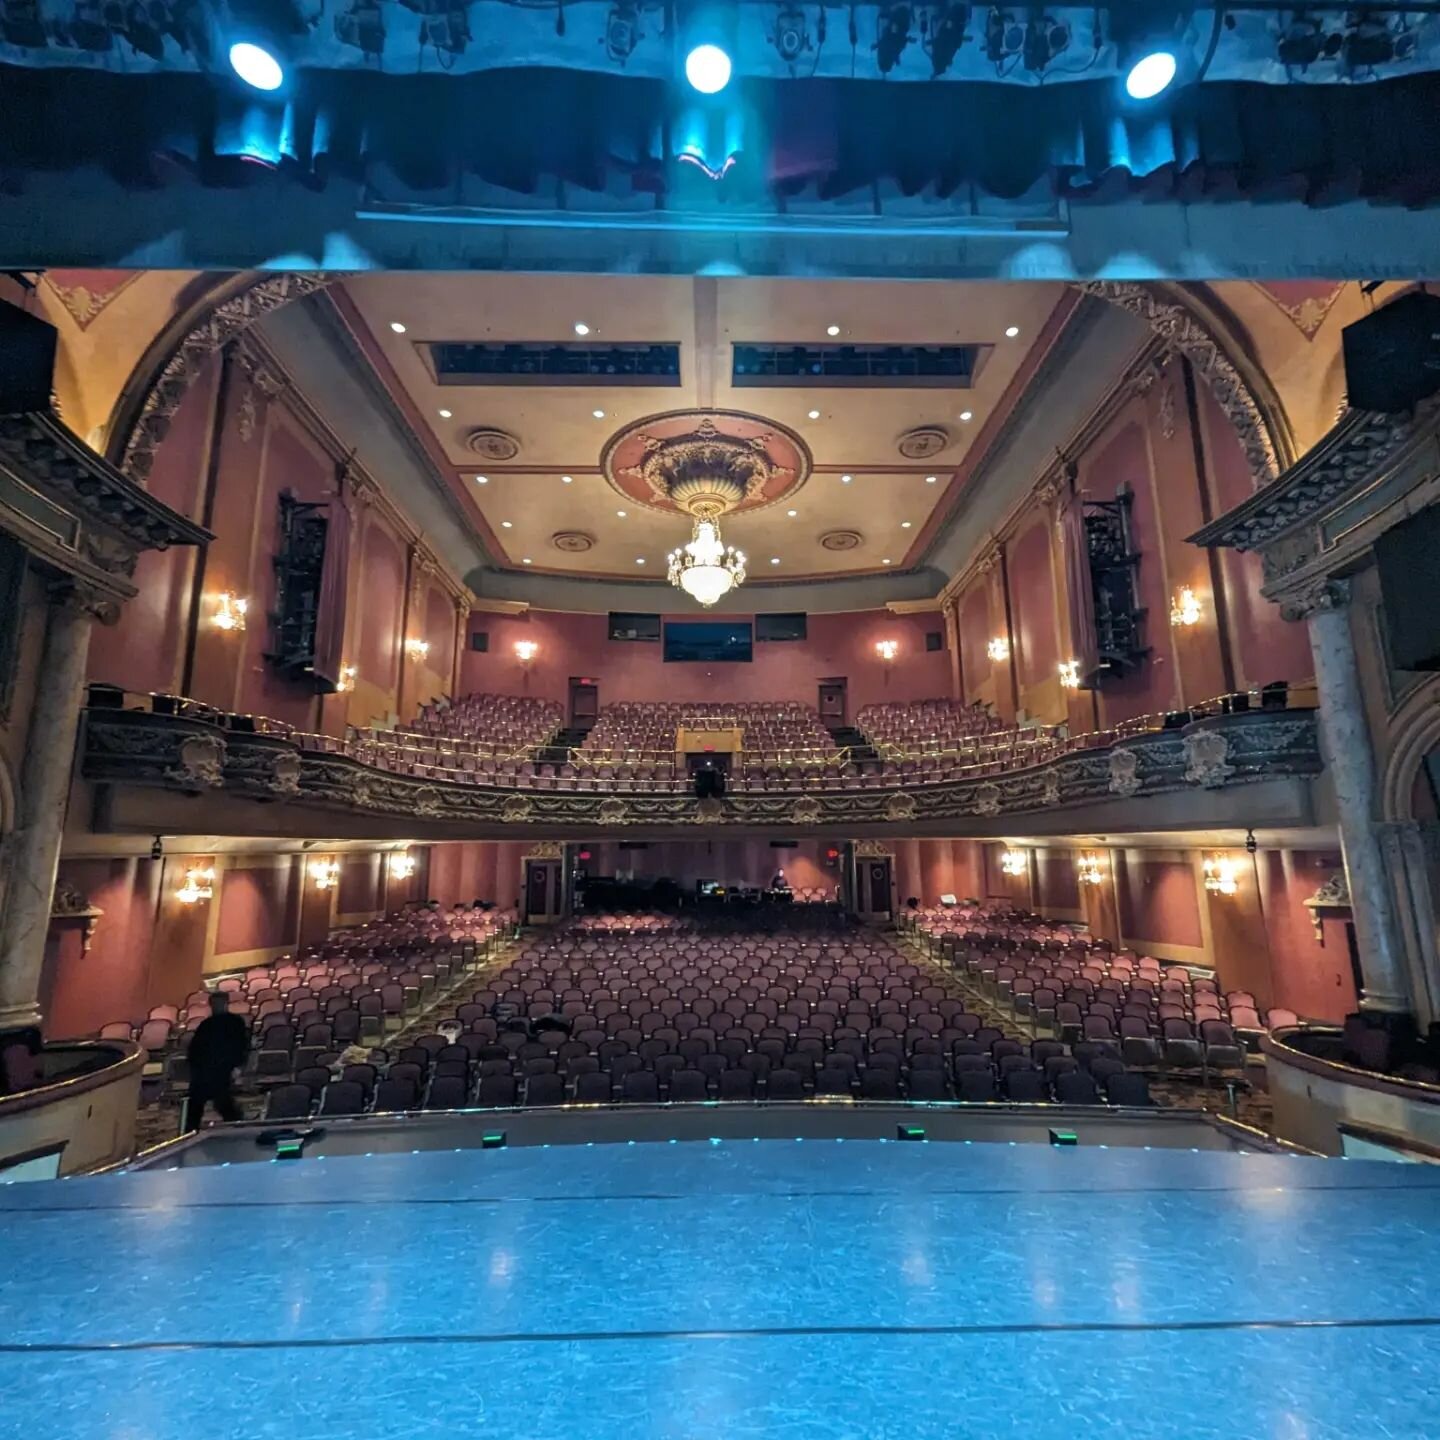 The Potatoes are on tour (sorta)! For the next six weeks we are travelling from Saint John NB, to Winnipeg MB, to Toronto ON for three different projects away from home. 

This week's office is the spectacular Imperial Theatre in Saint John working w